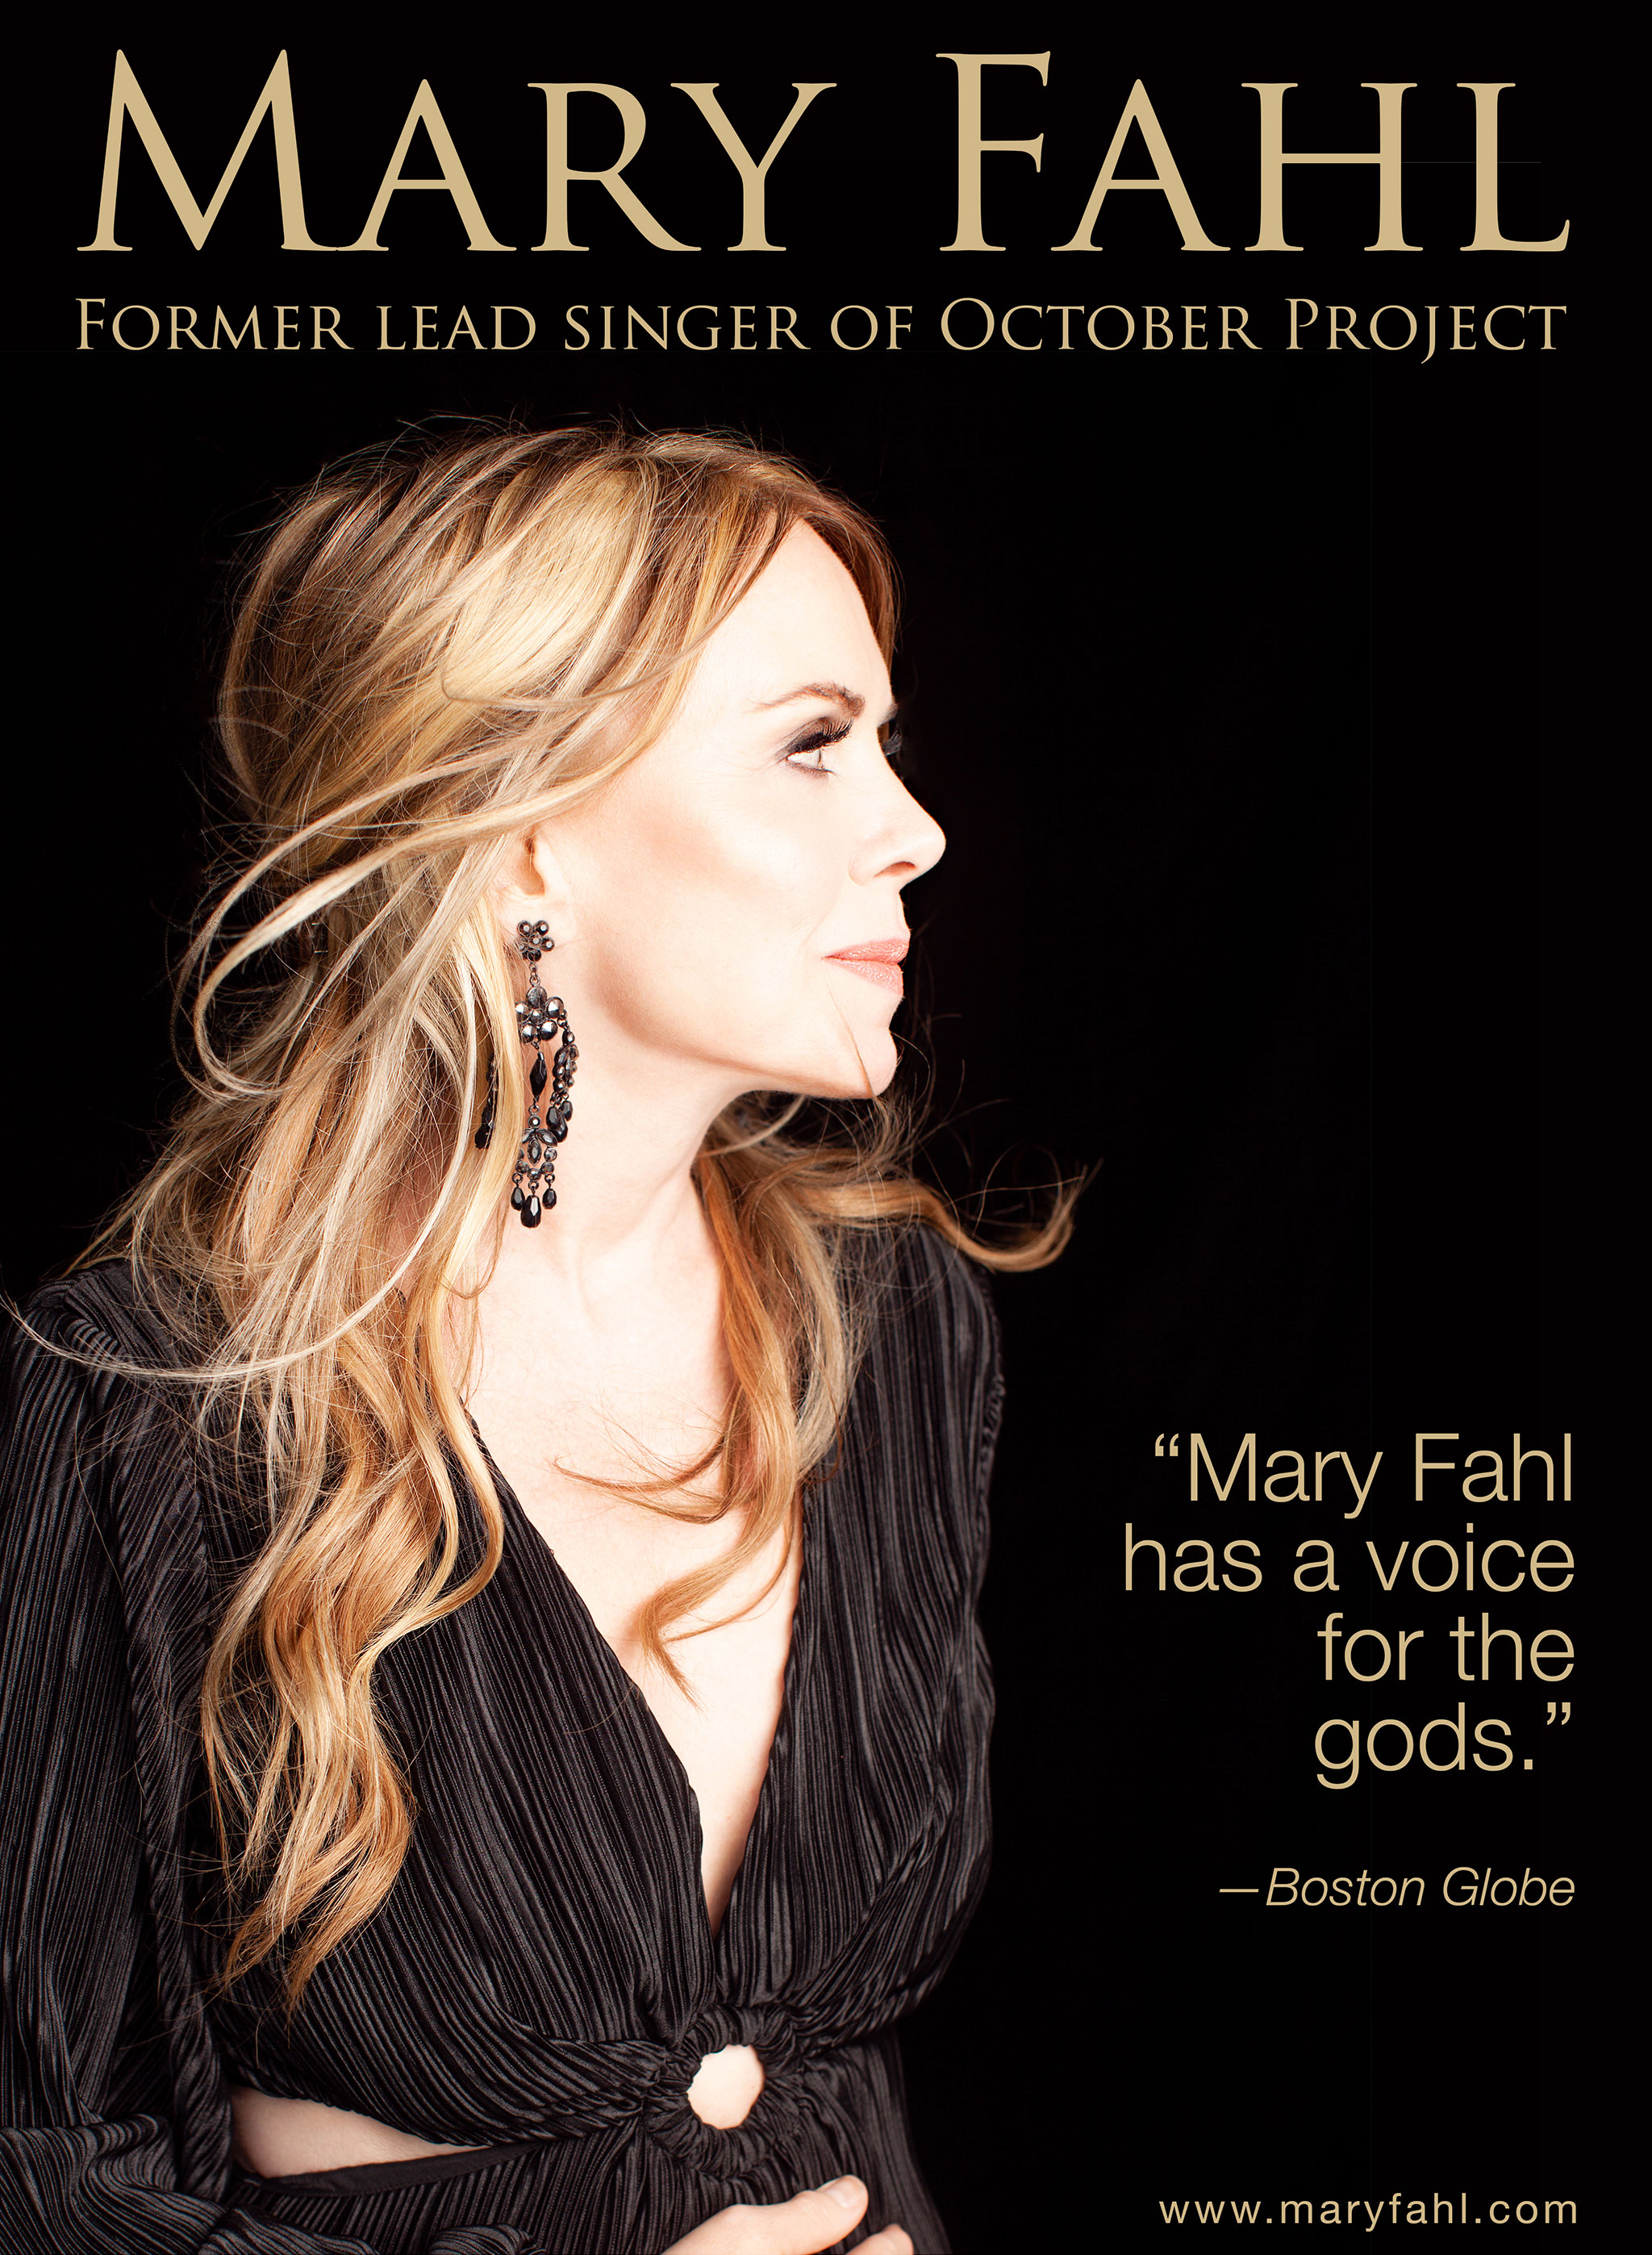 mary fahl tour dates